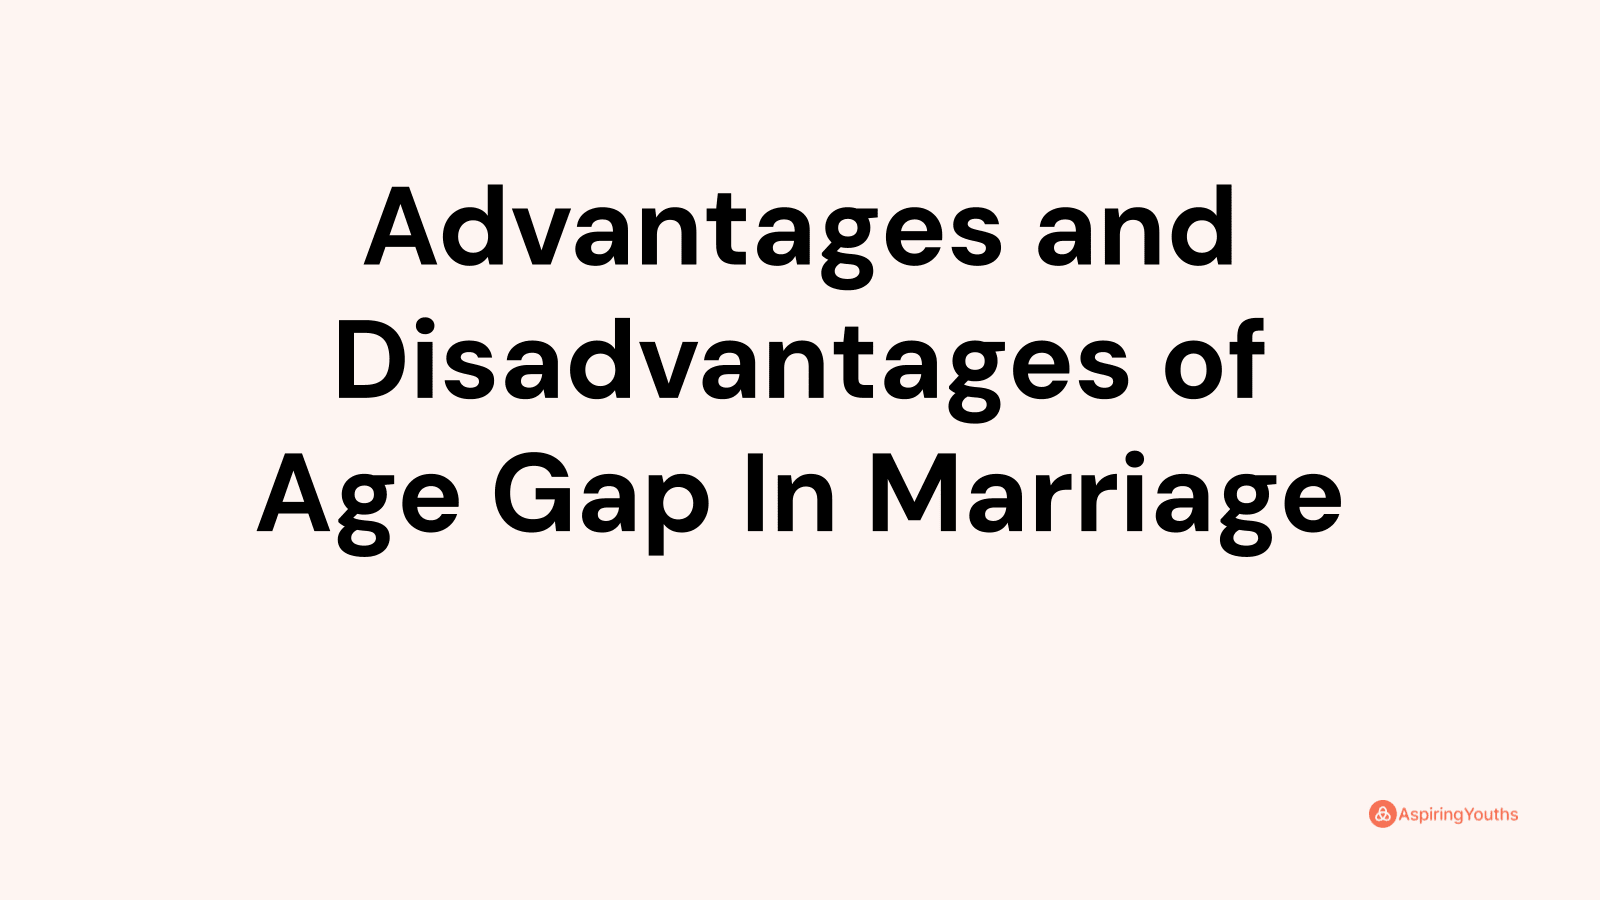 Advantages and disadvantages of Age Gap In Marriage